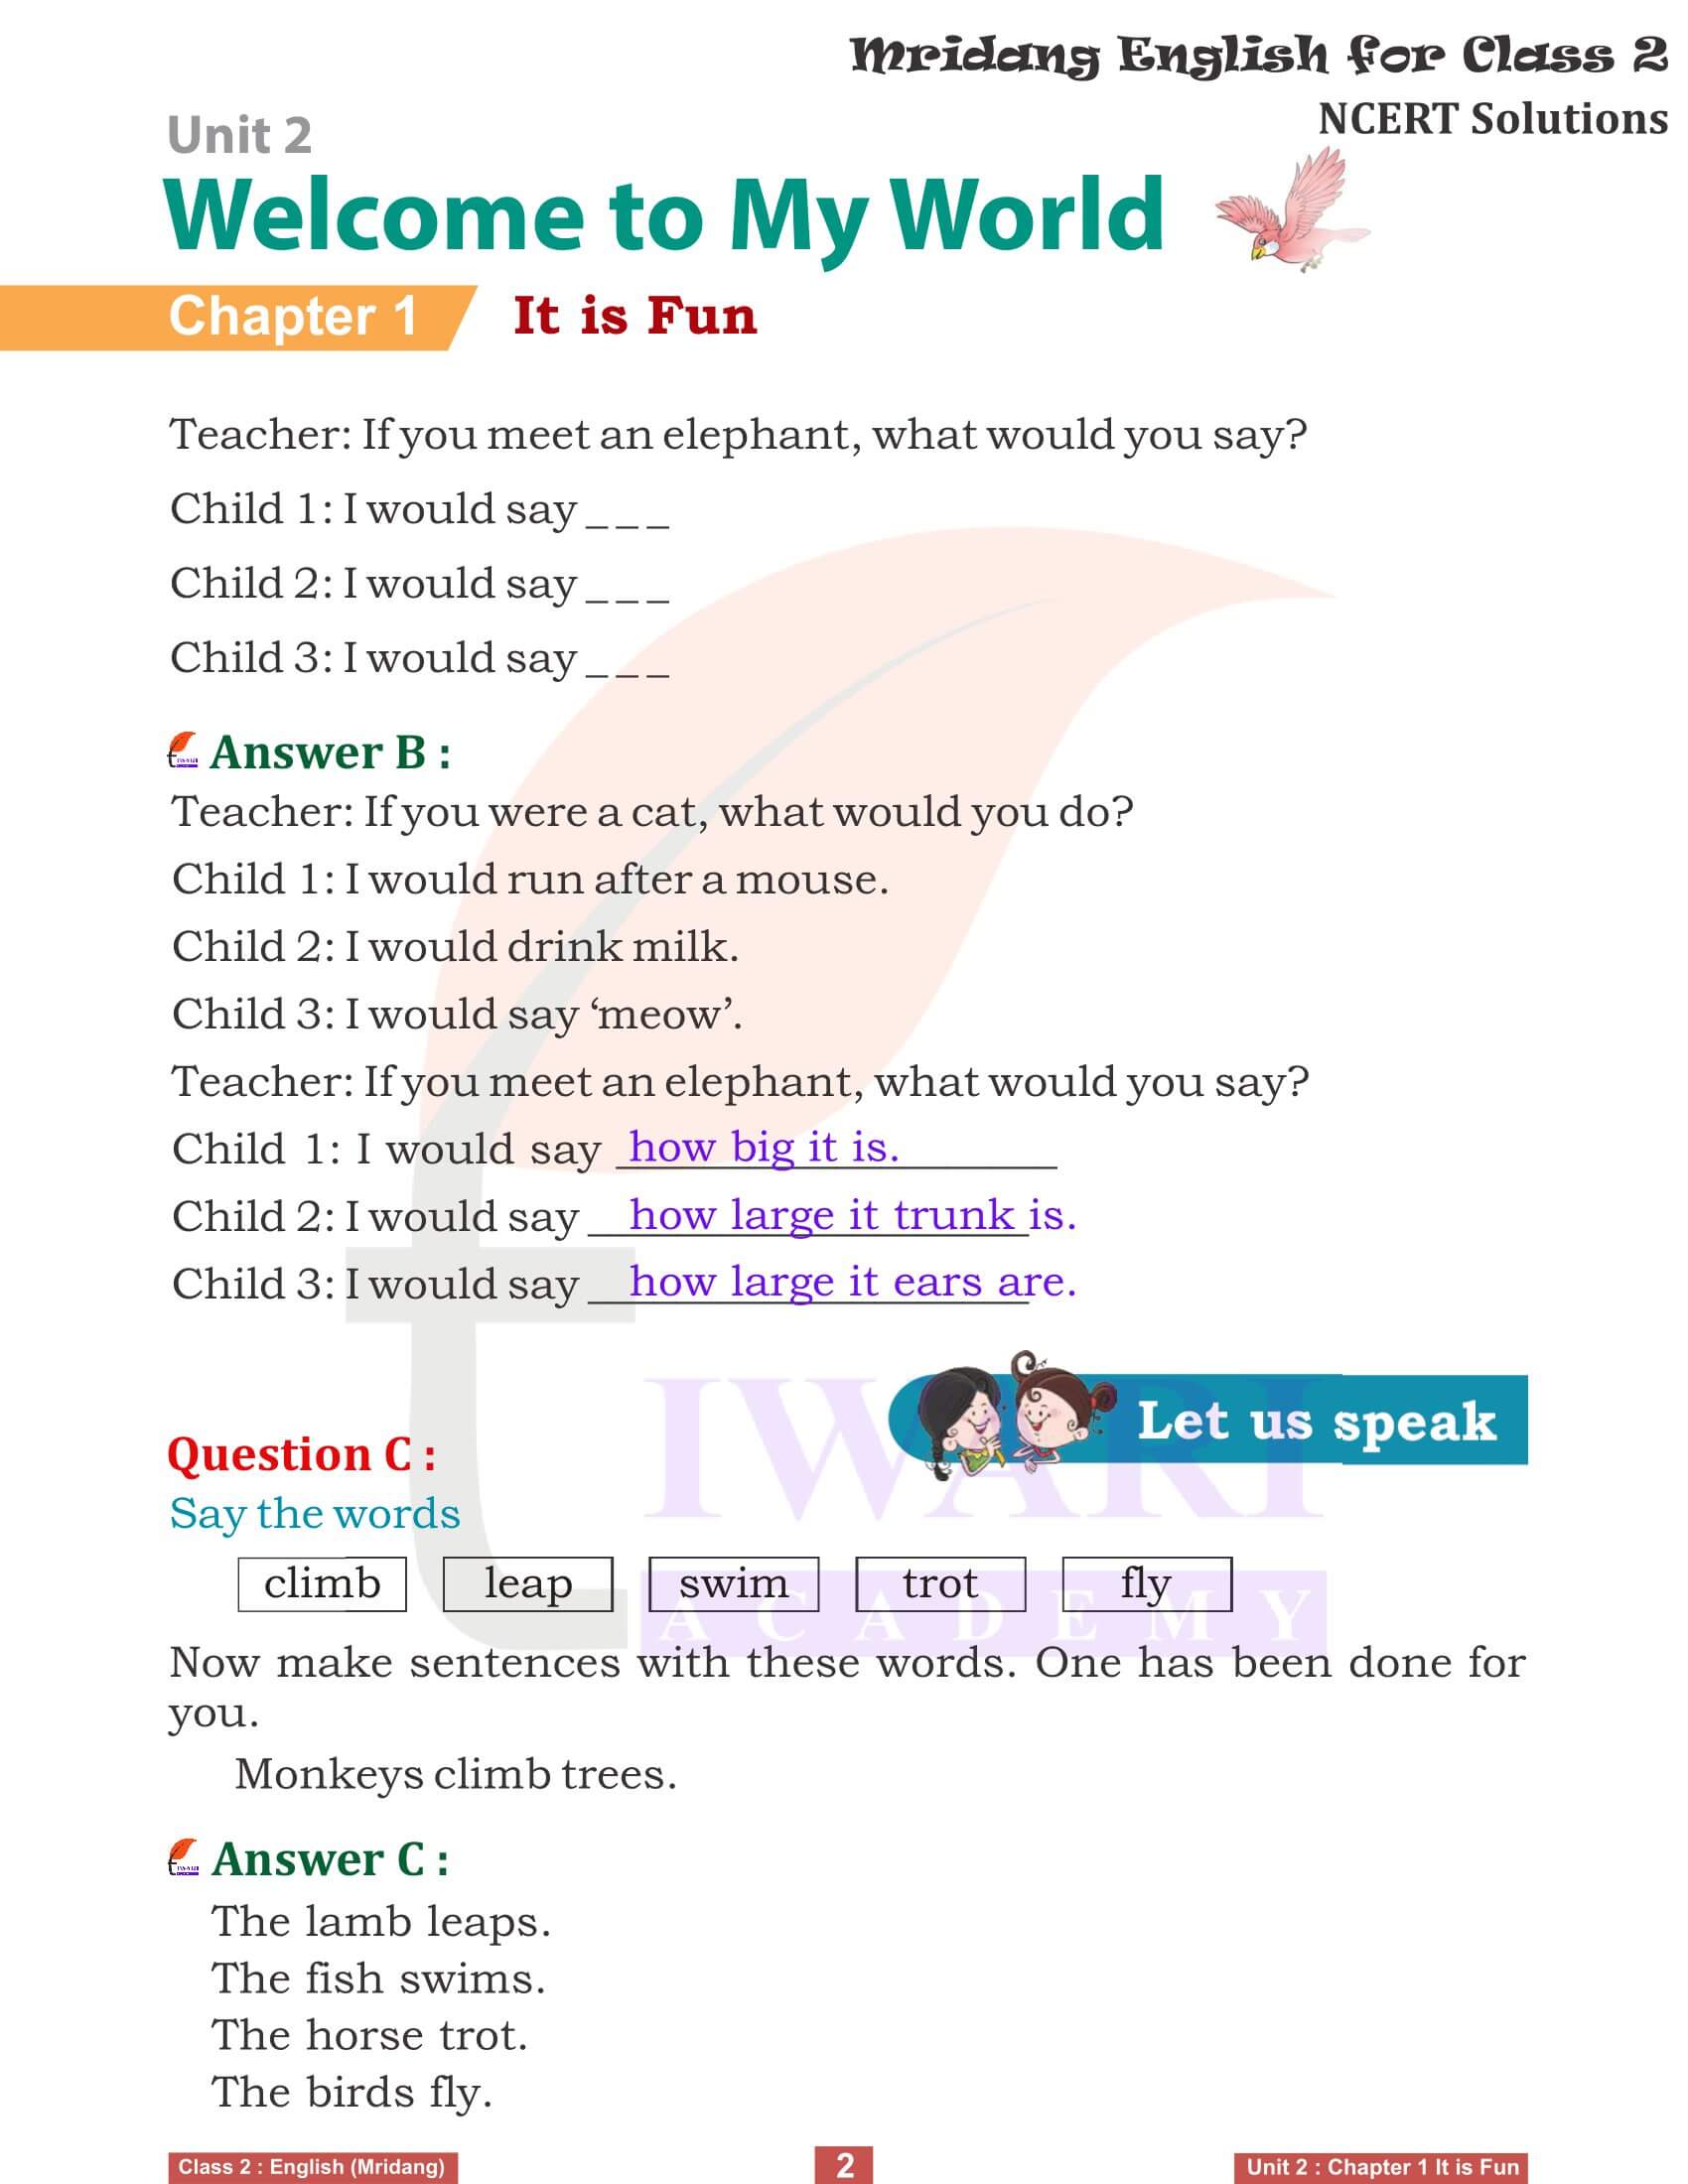 NCERT Solutions for class 2 English Mridang Unit 2 Welcome to My World Chapter 1 It is Fun Answers